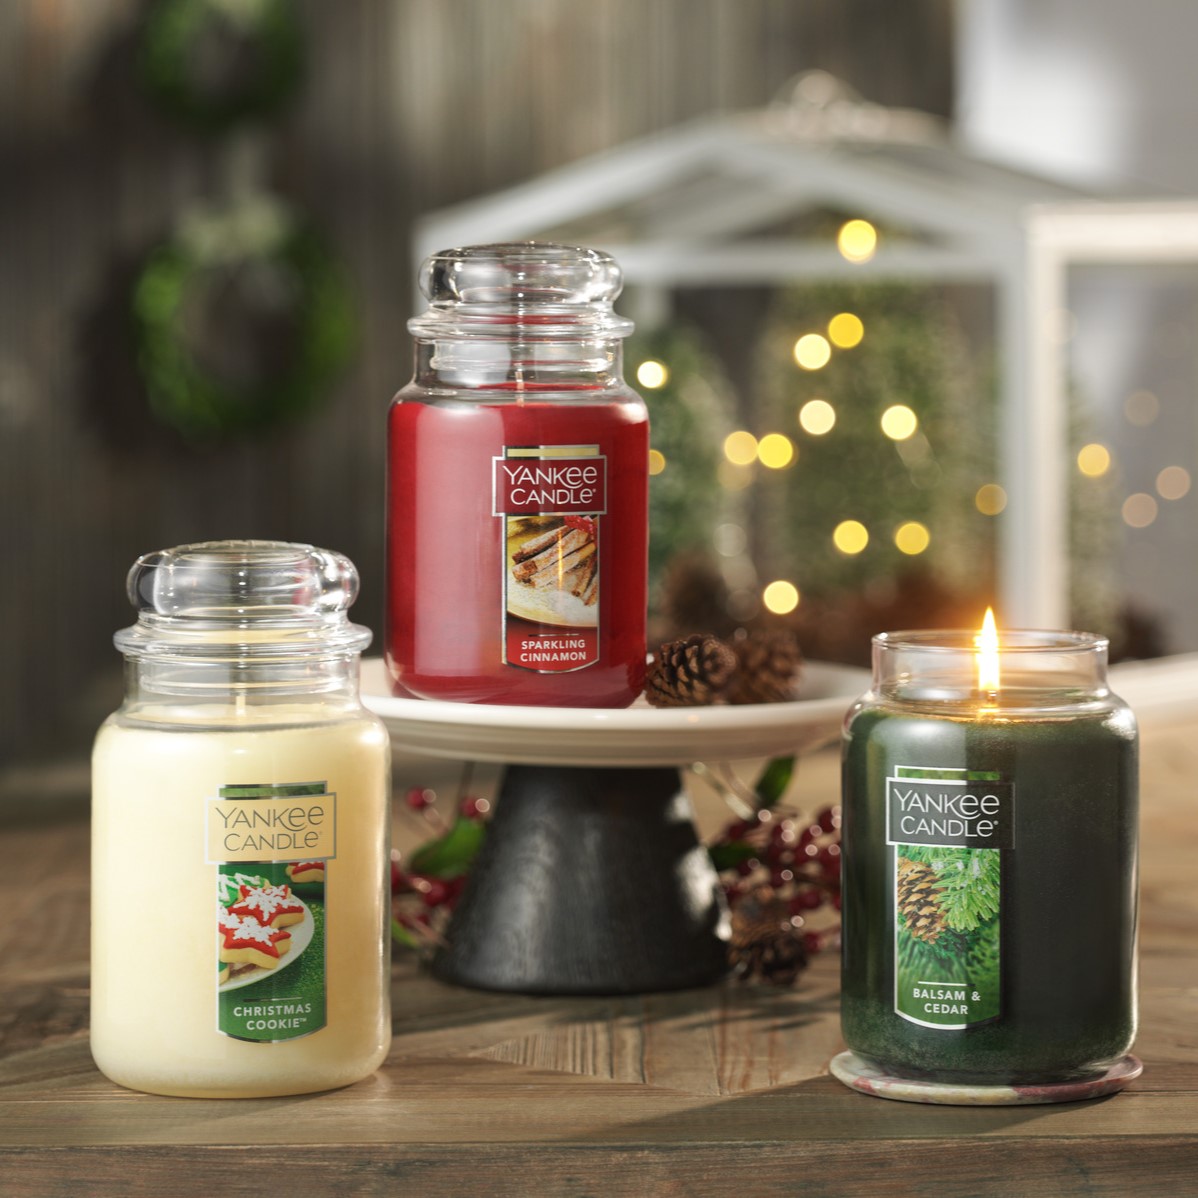 Candle Days from Yankee Candle